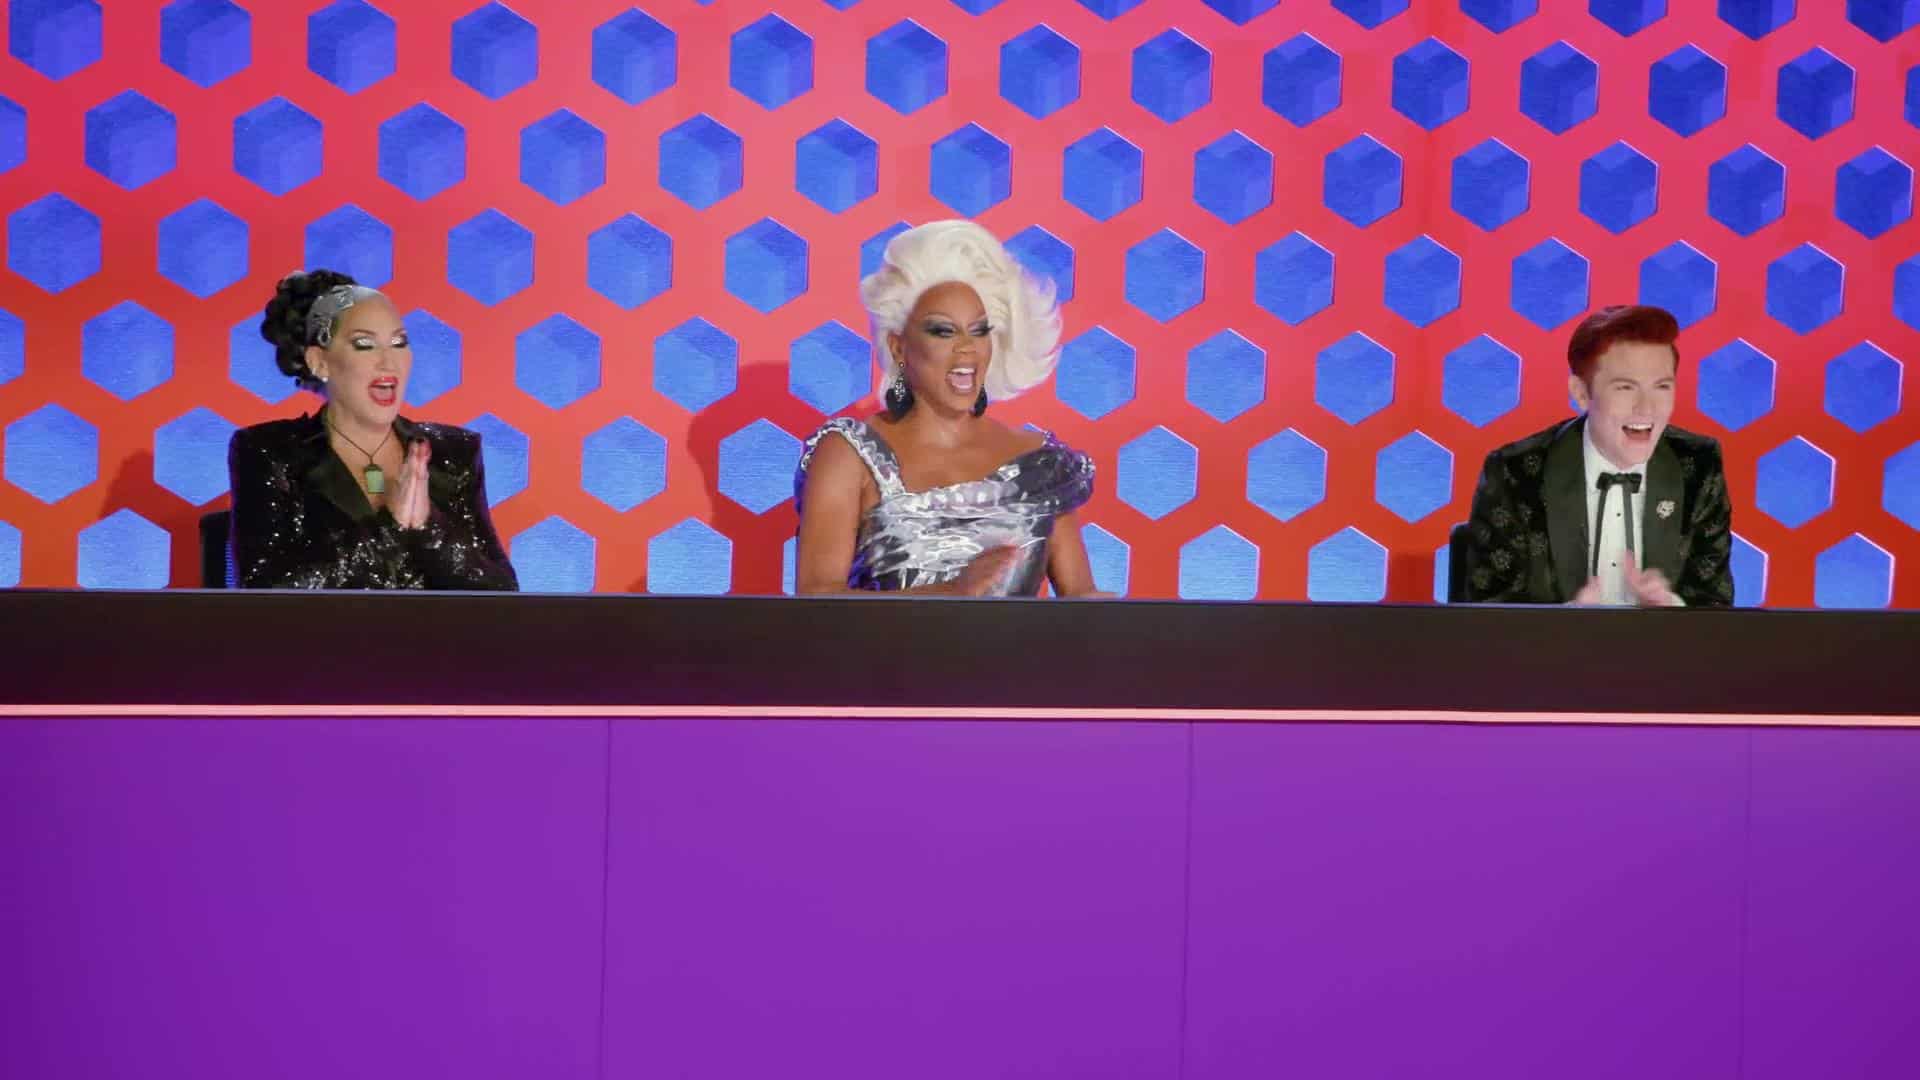 Michelle Visage, RuPaul, and Rhys Nicholson in this image from World of Wonder